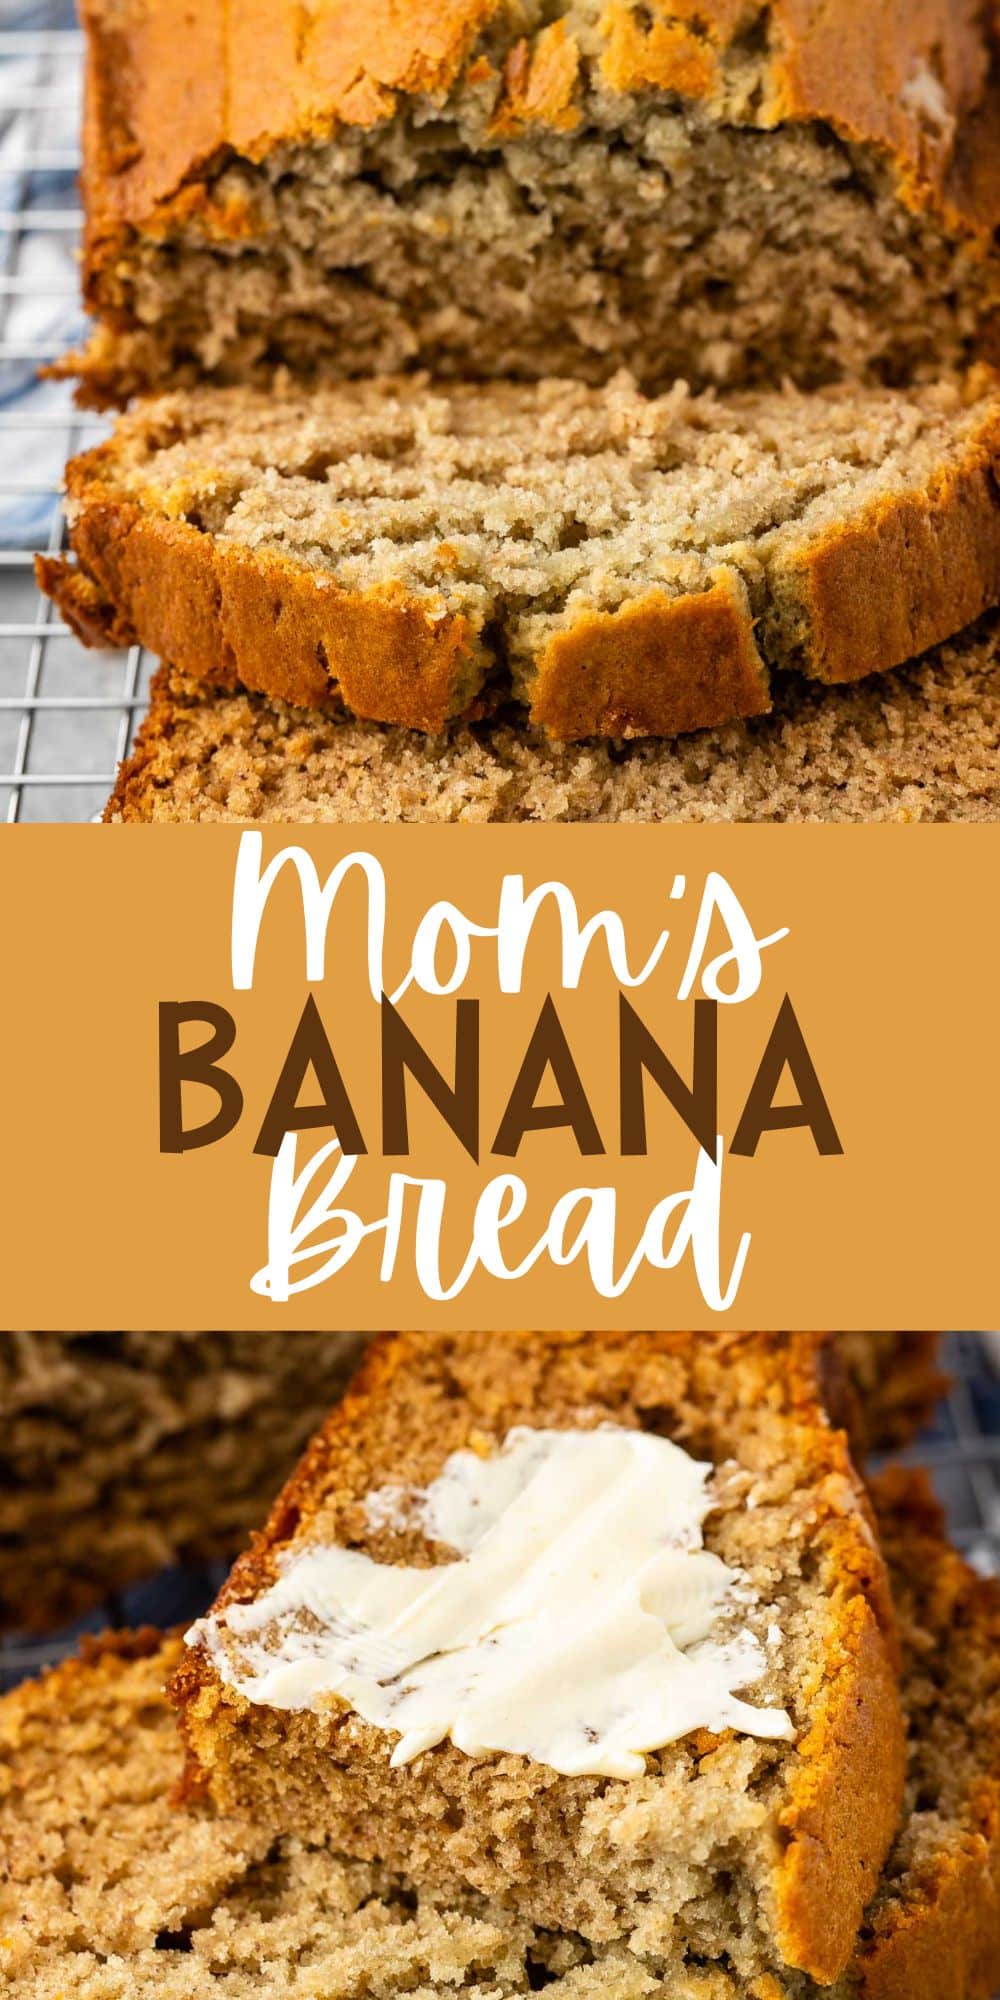 two photos of sliced banana bread on a drying rack with words on the image.